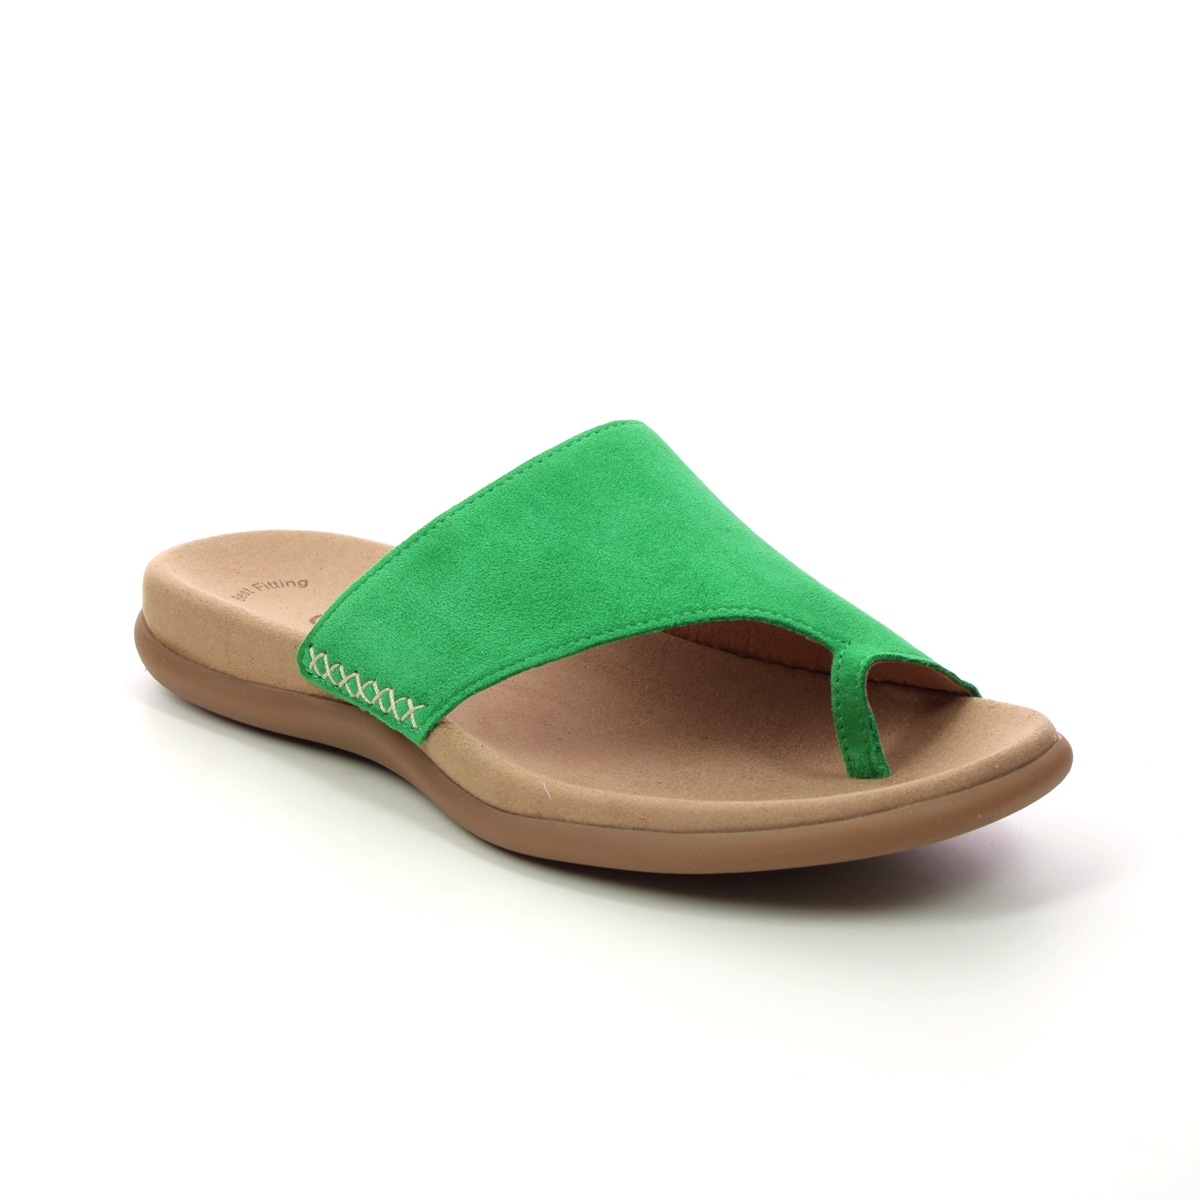 Gabor Lanzarote Green Suede Womens Toe Post Sandals 23.700.11 in a Plain Leather in Size 41